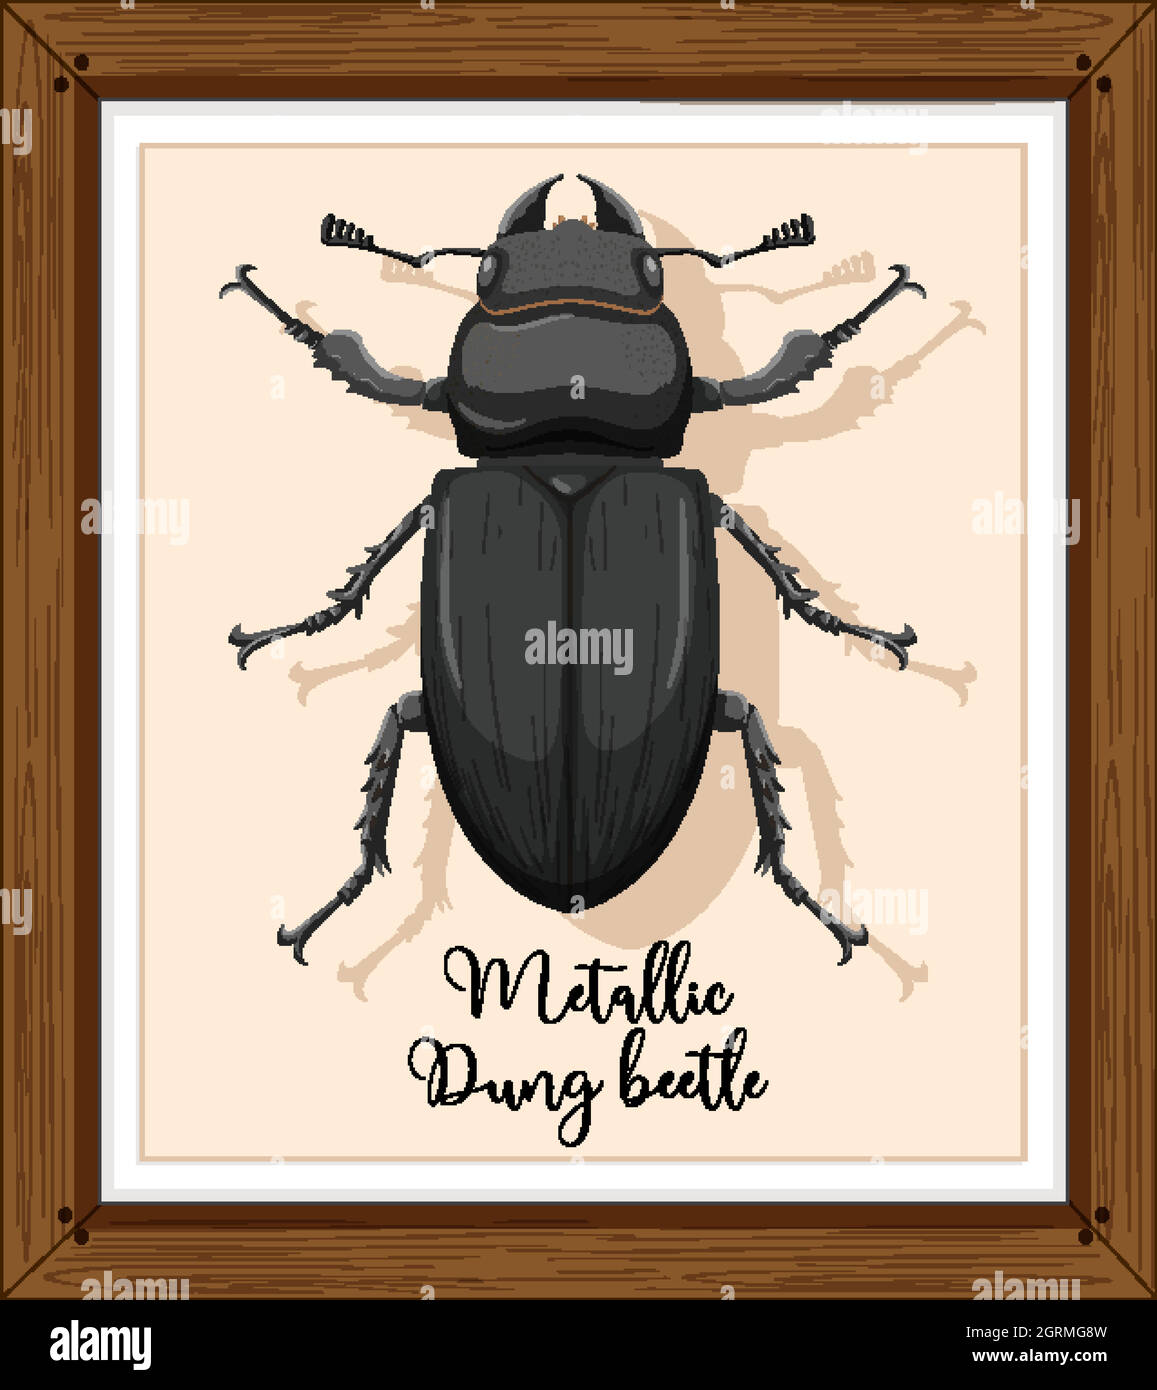 Beetle on wooden frame Stock Vector